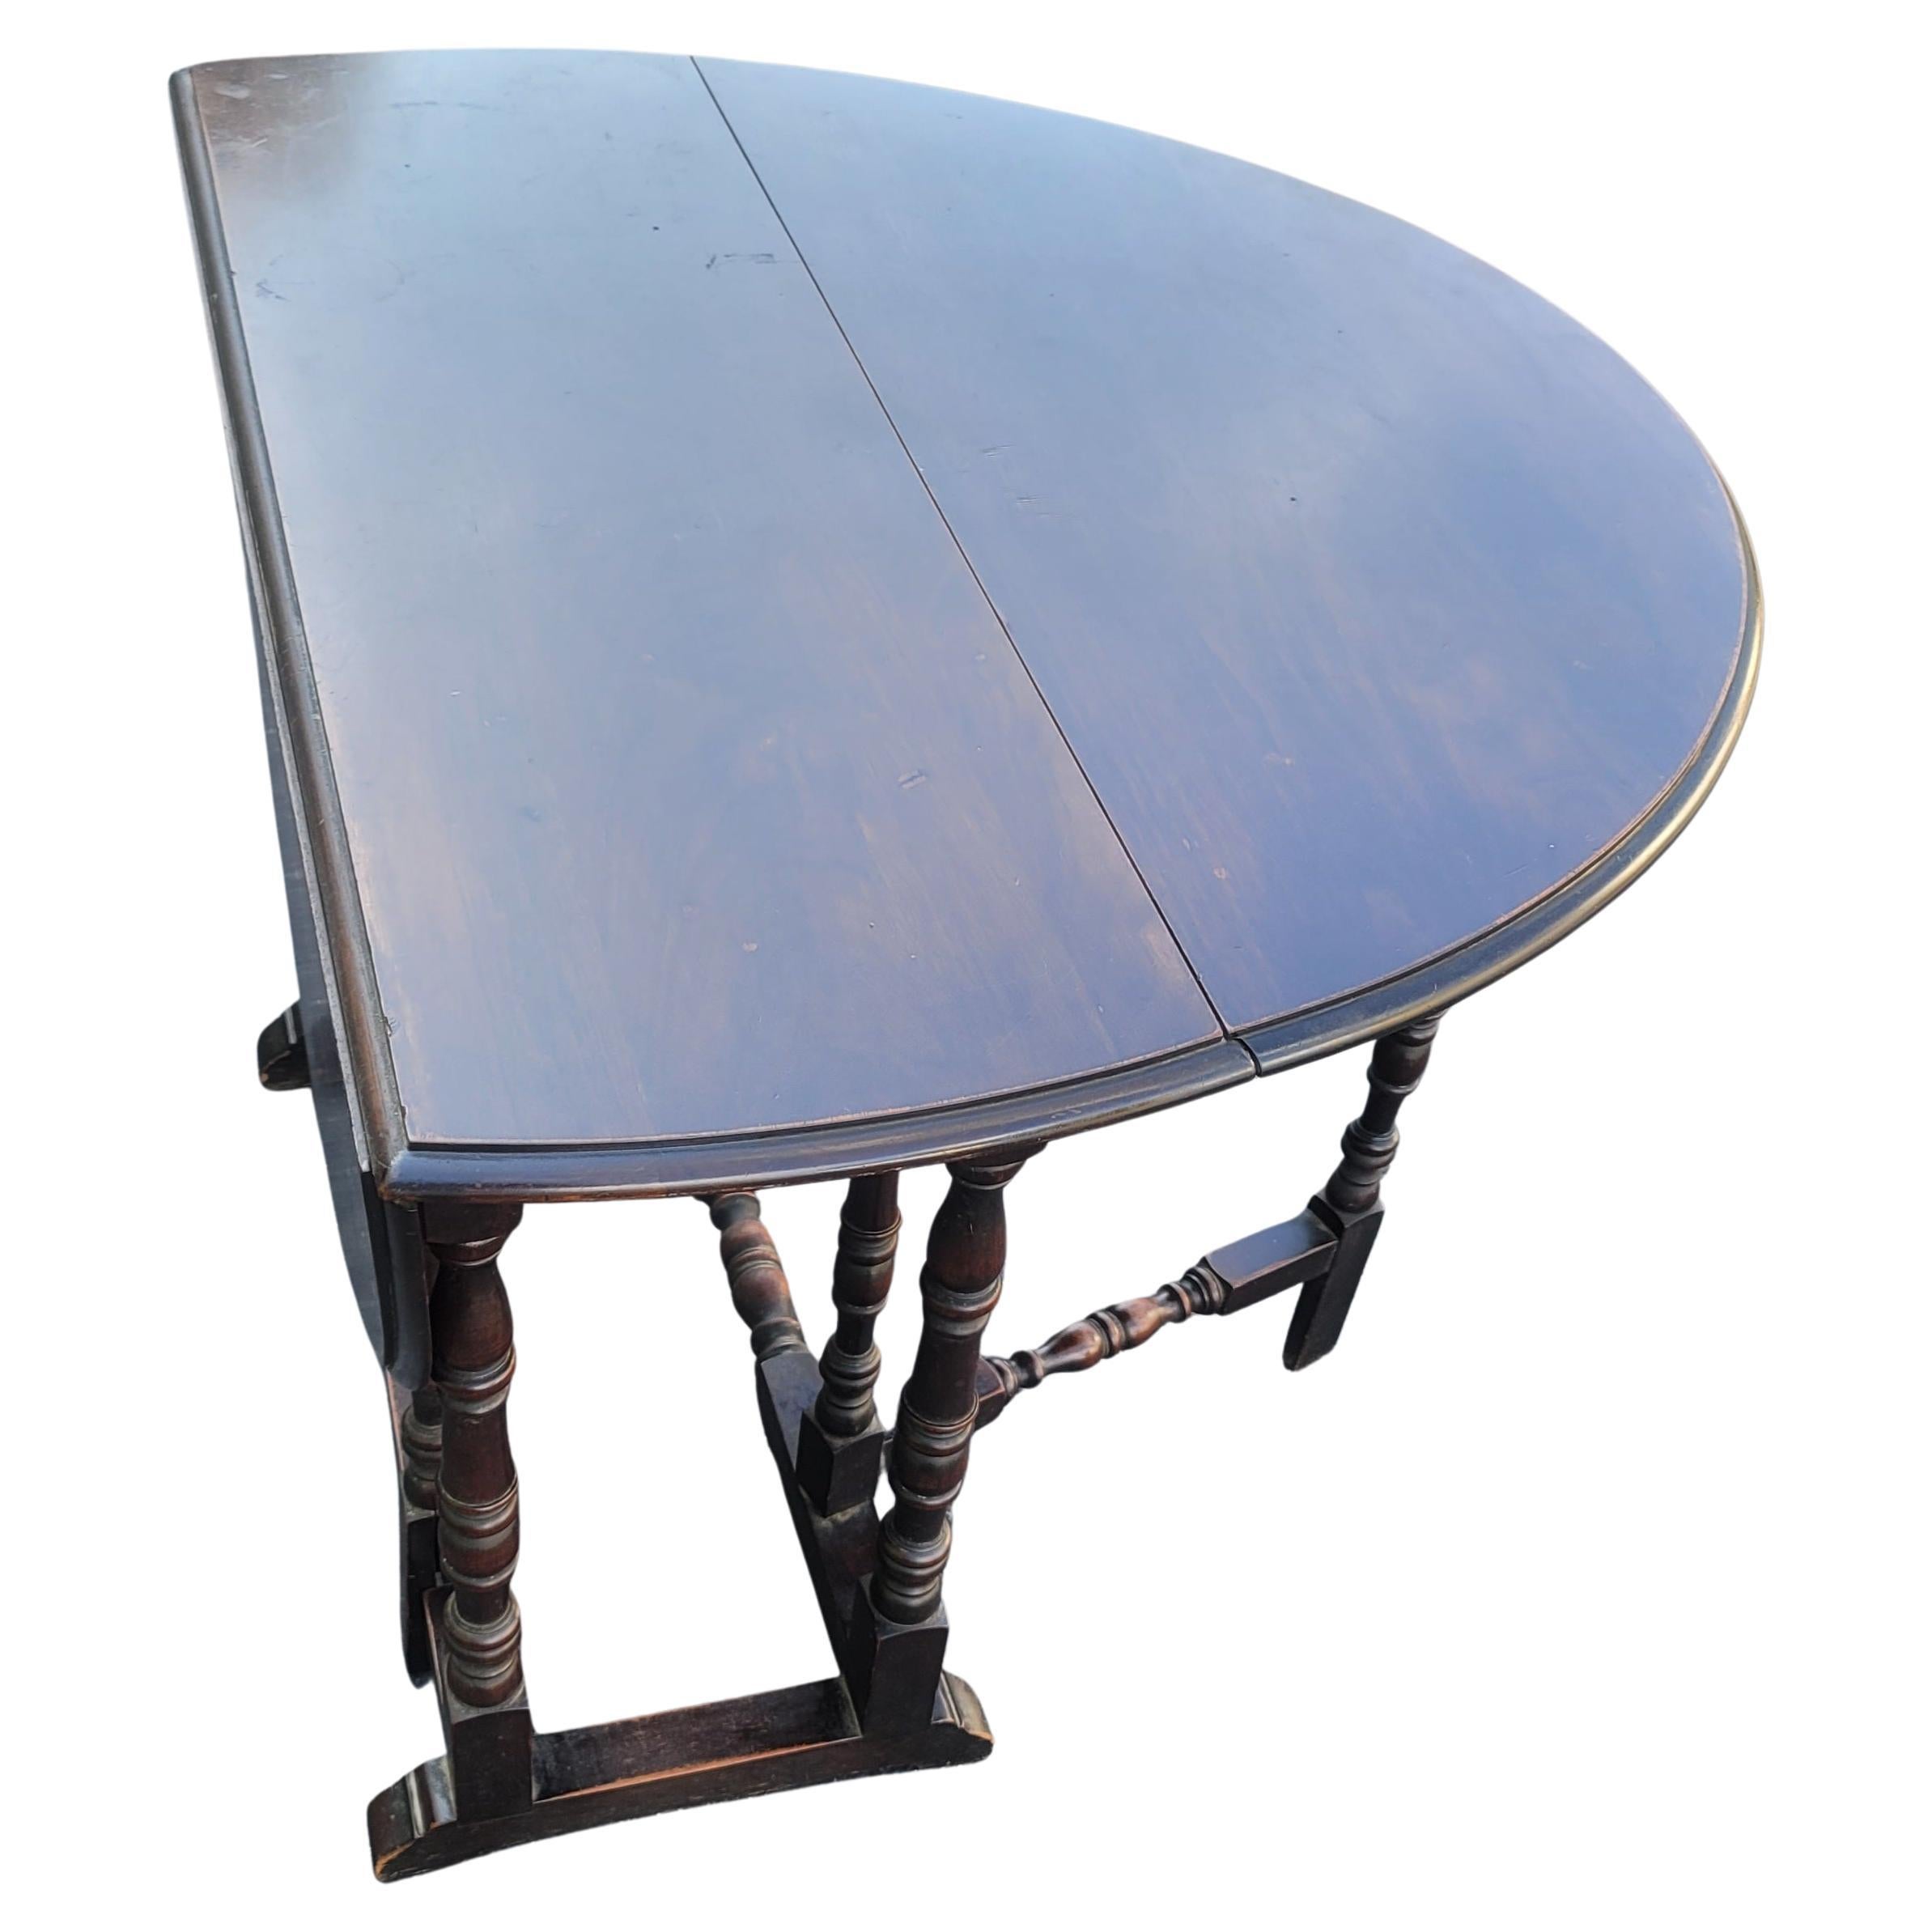 20th Century Antique Walnut Gatelegs Oval Table, Circa 1910s For Sale